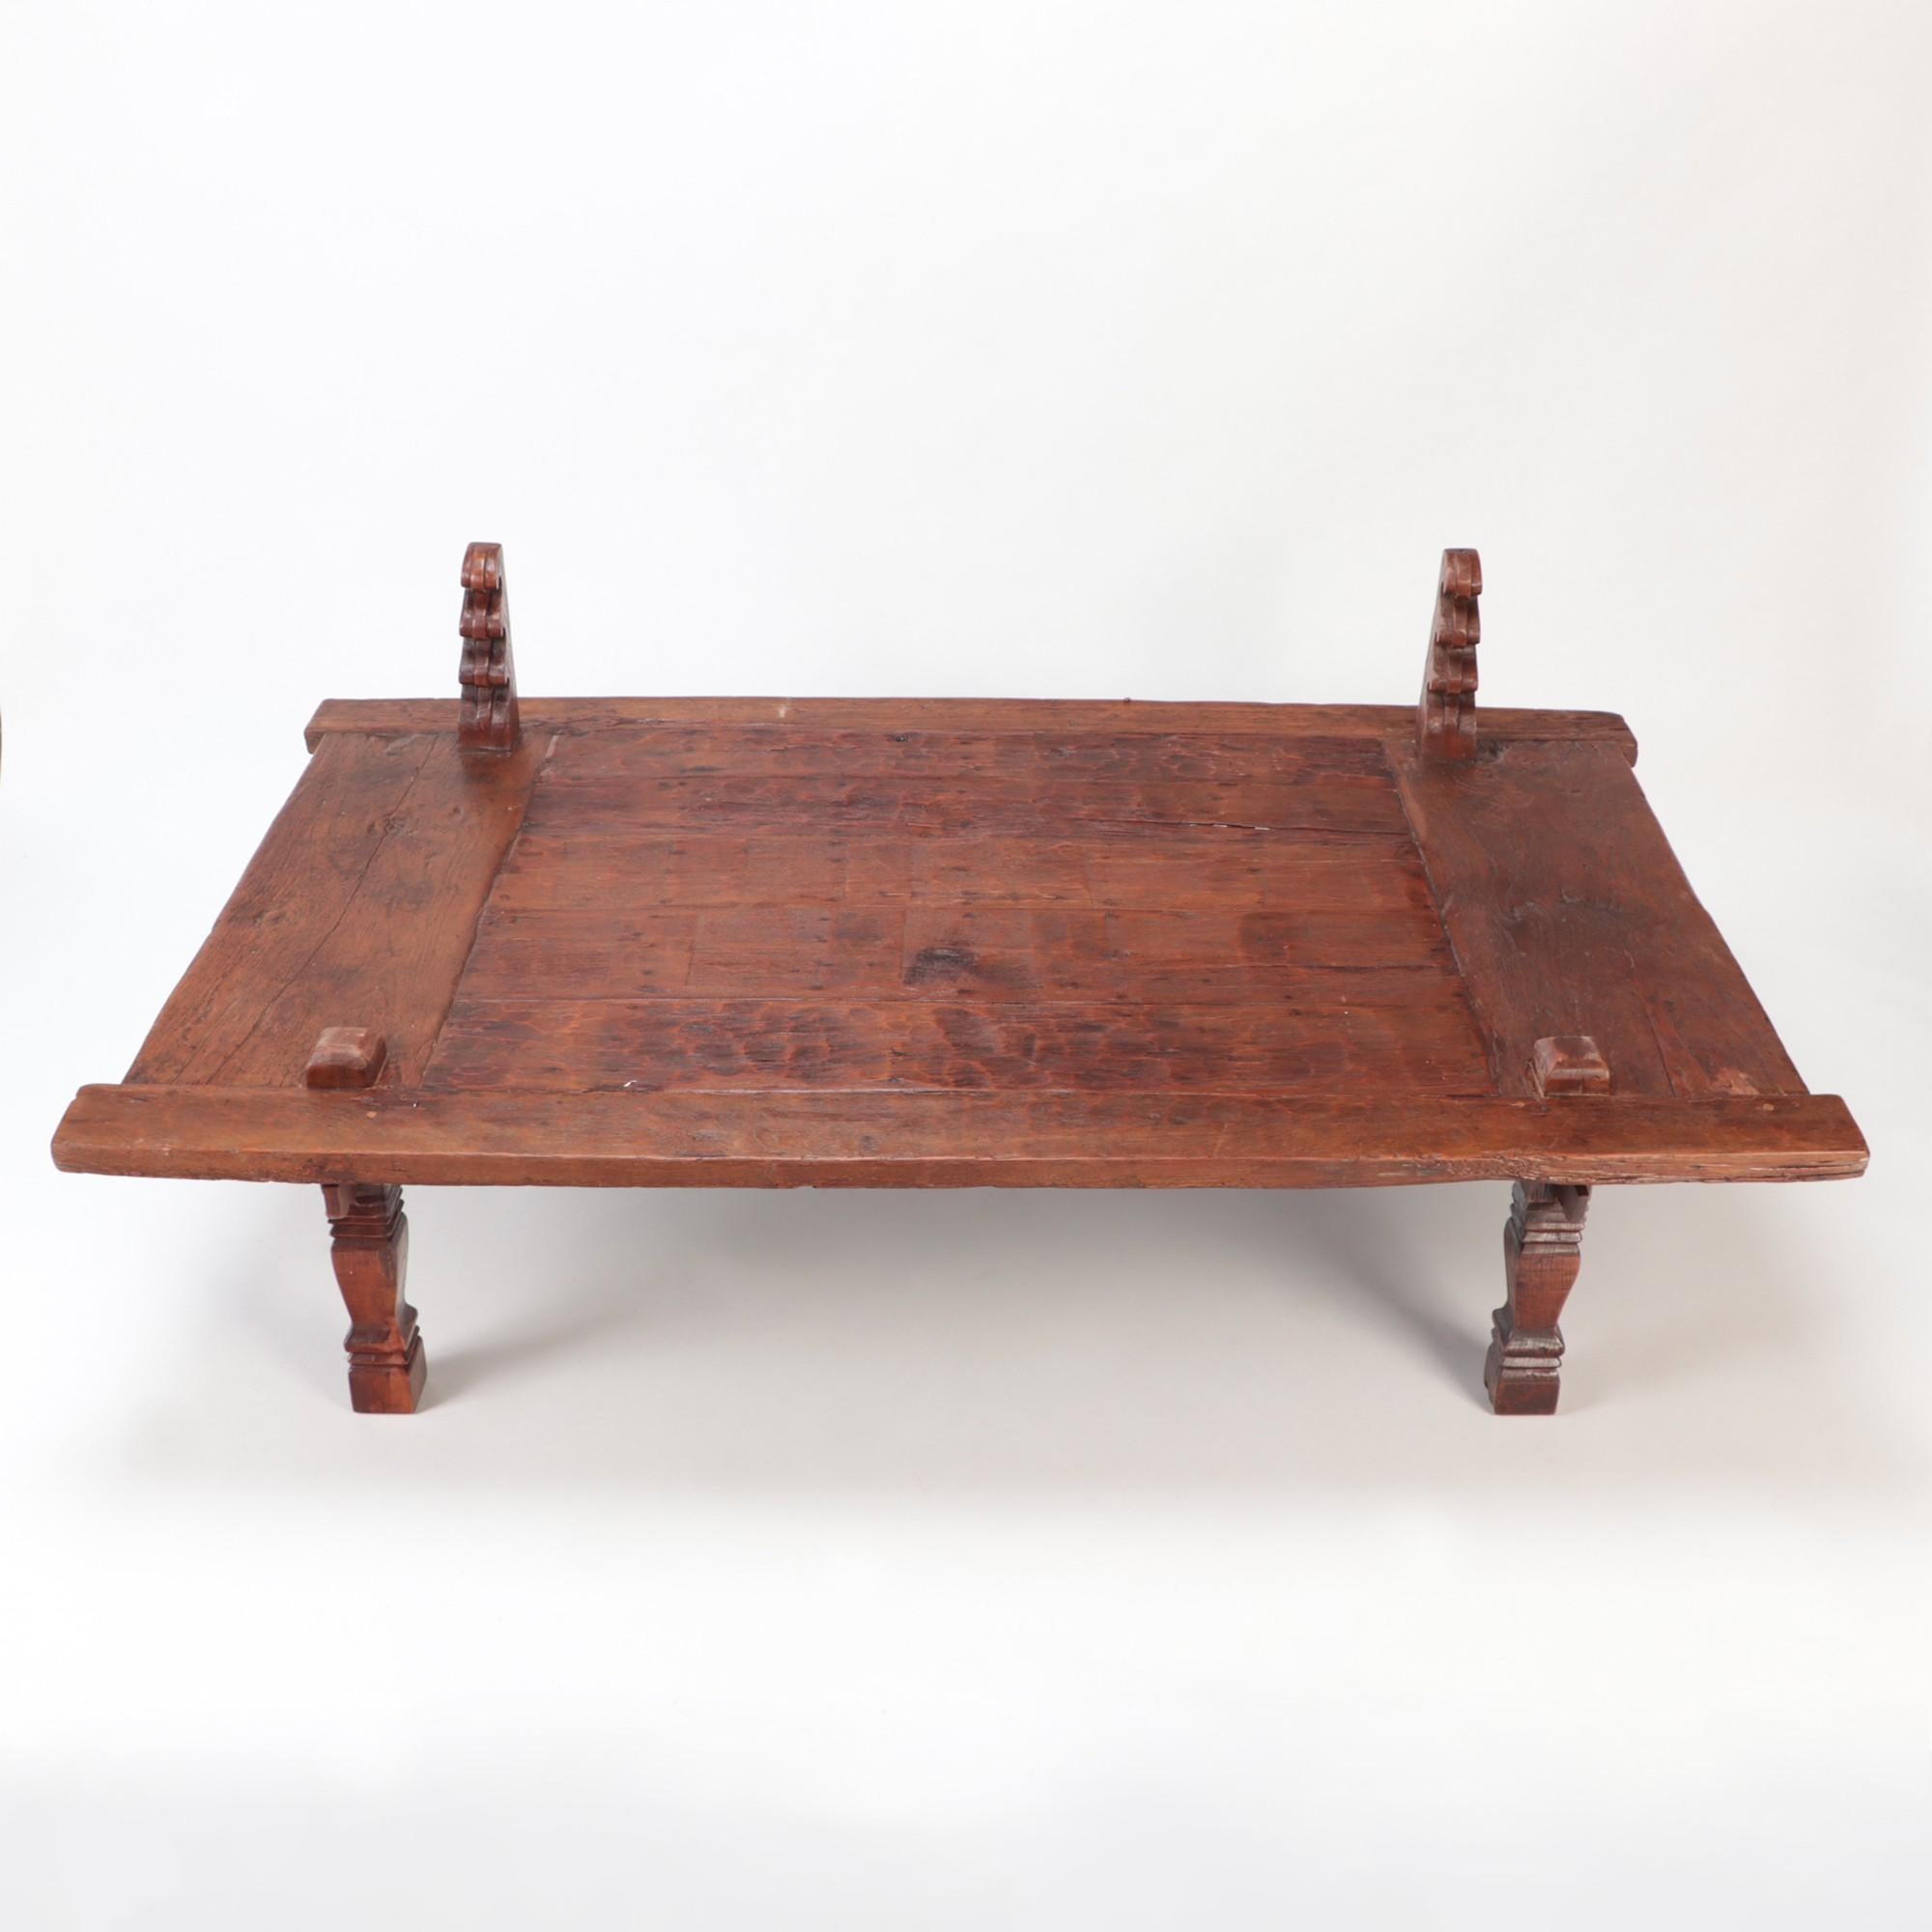 Early 19th Century Indonesian Coffee Table / Sewing Table Solid Teak In Good Condition For Sale In Philadelphia, PA